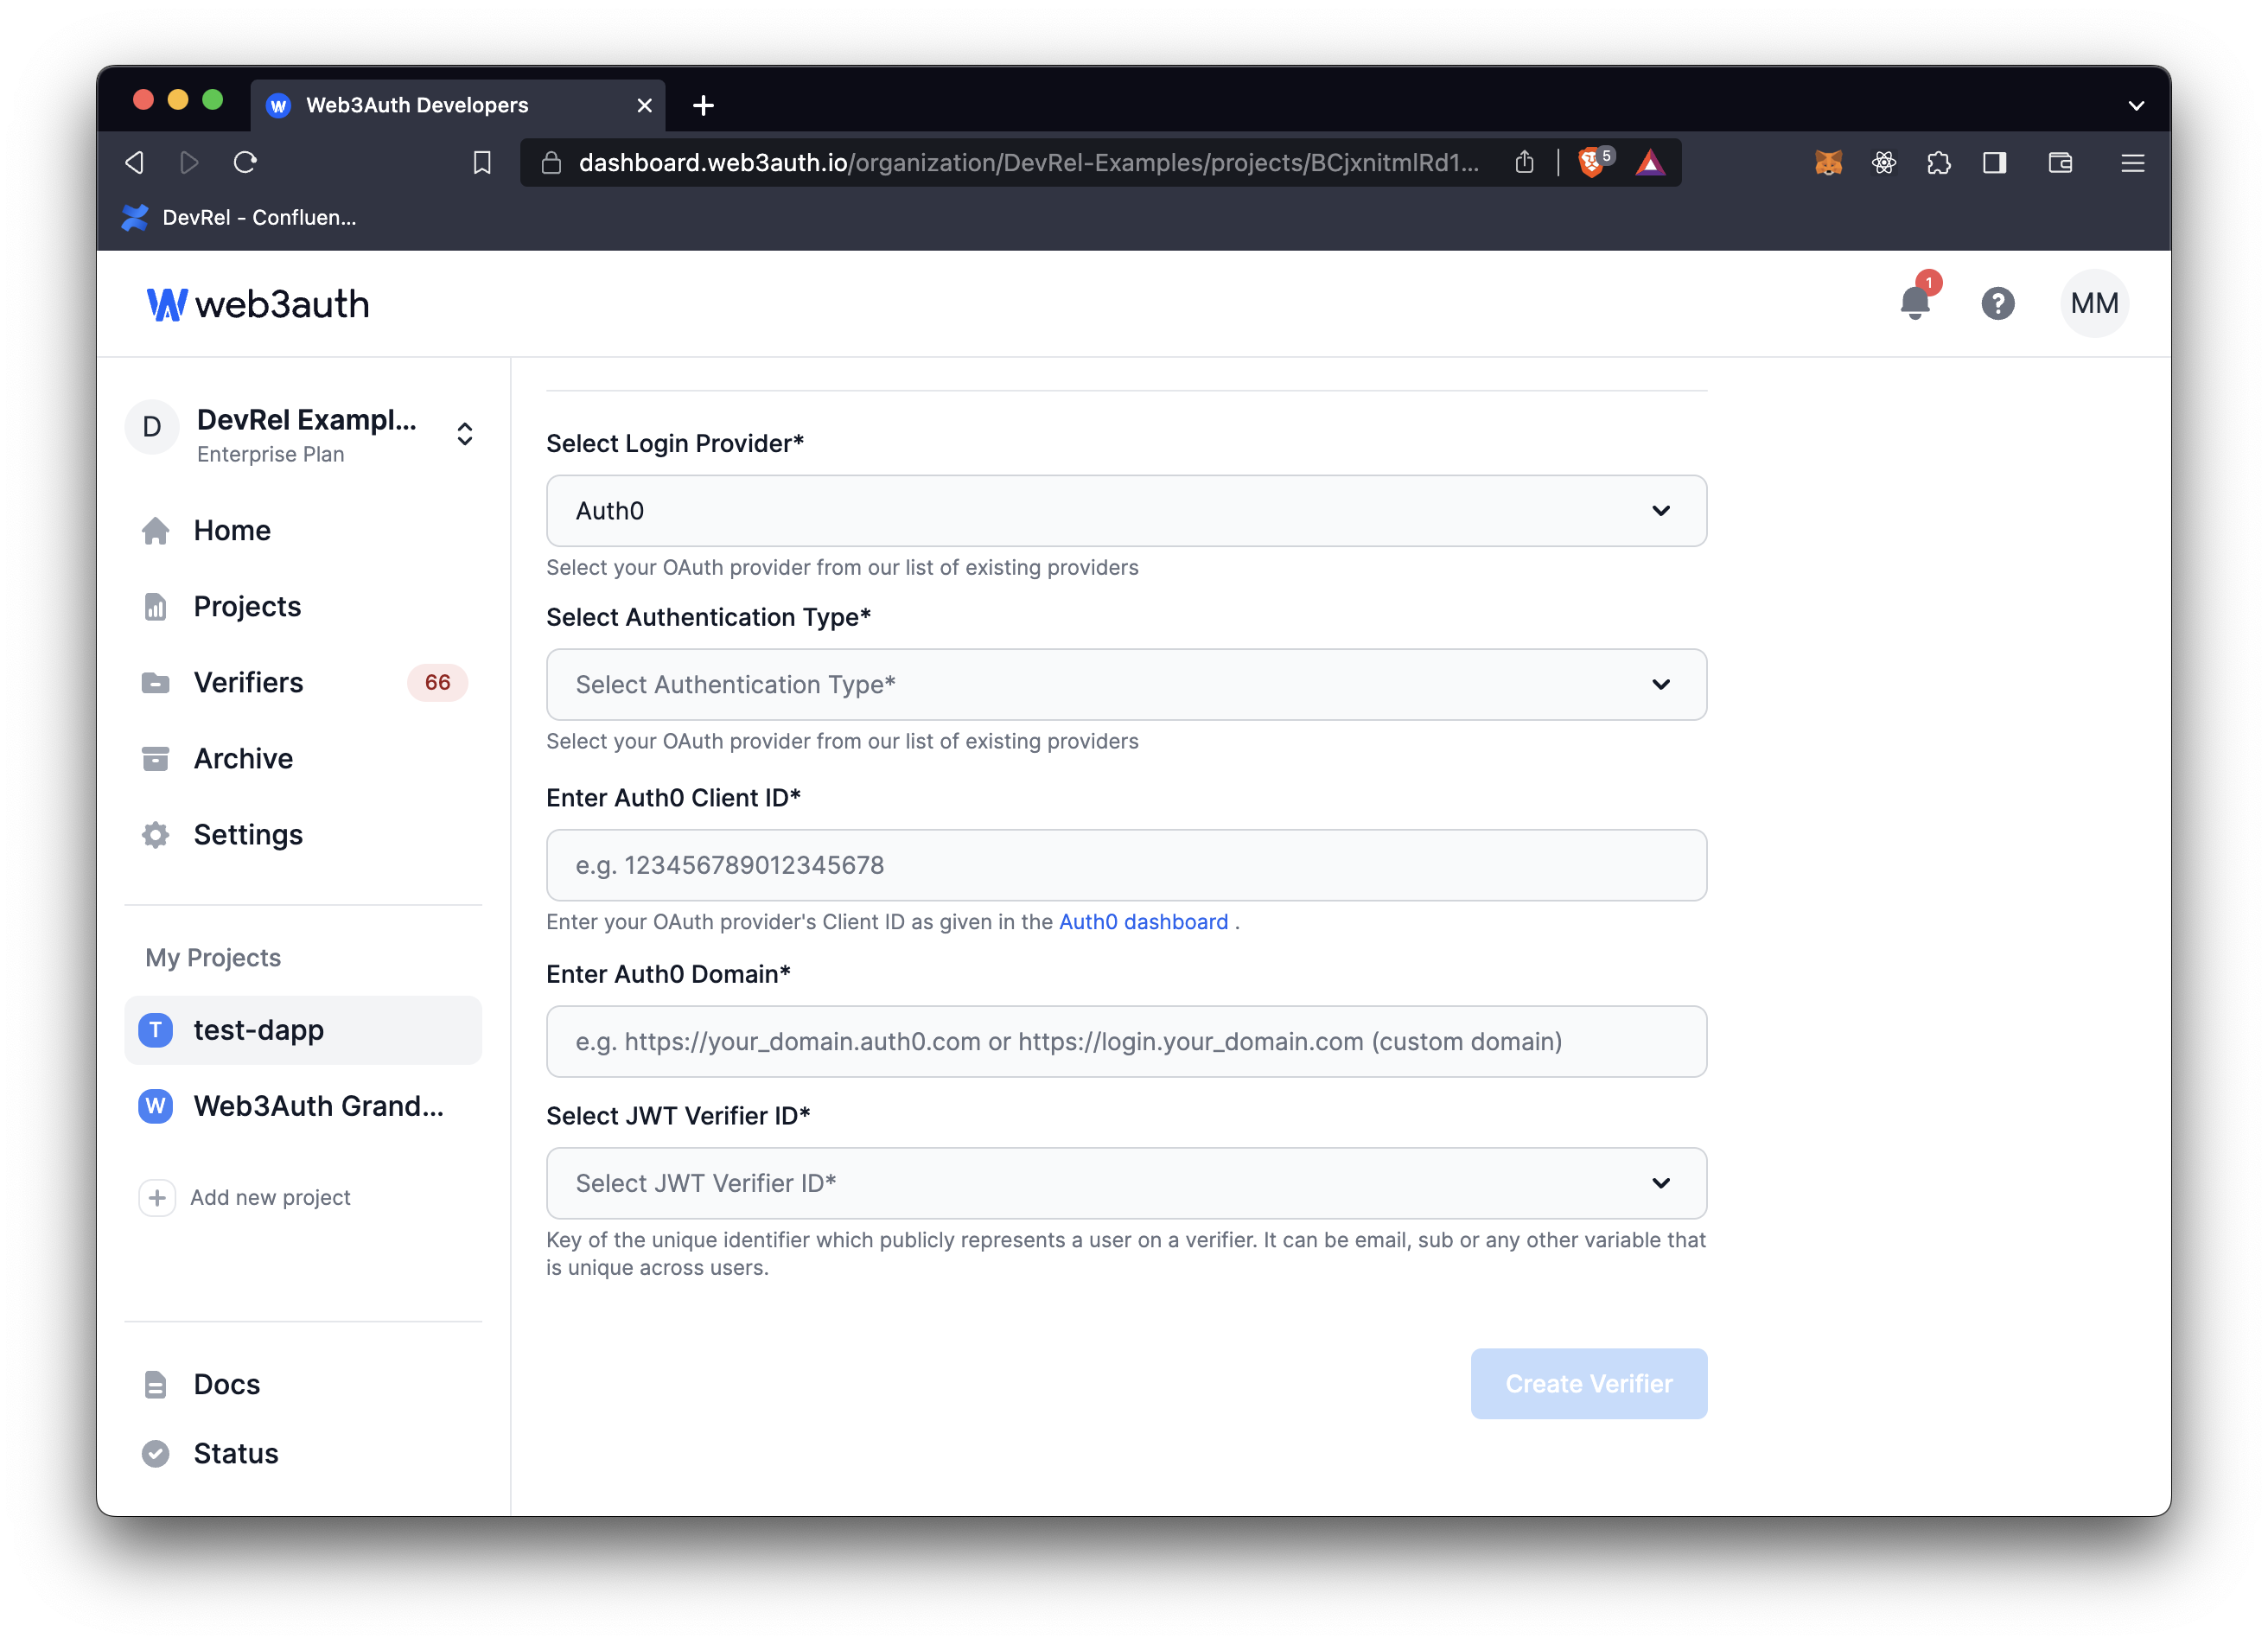 KaKao - Auth0 Client ID and Auth0 Domain on Web3Auth Dashboard